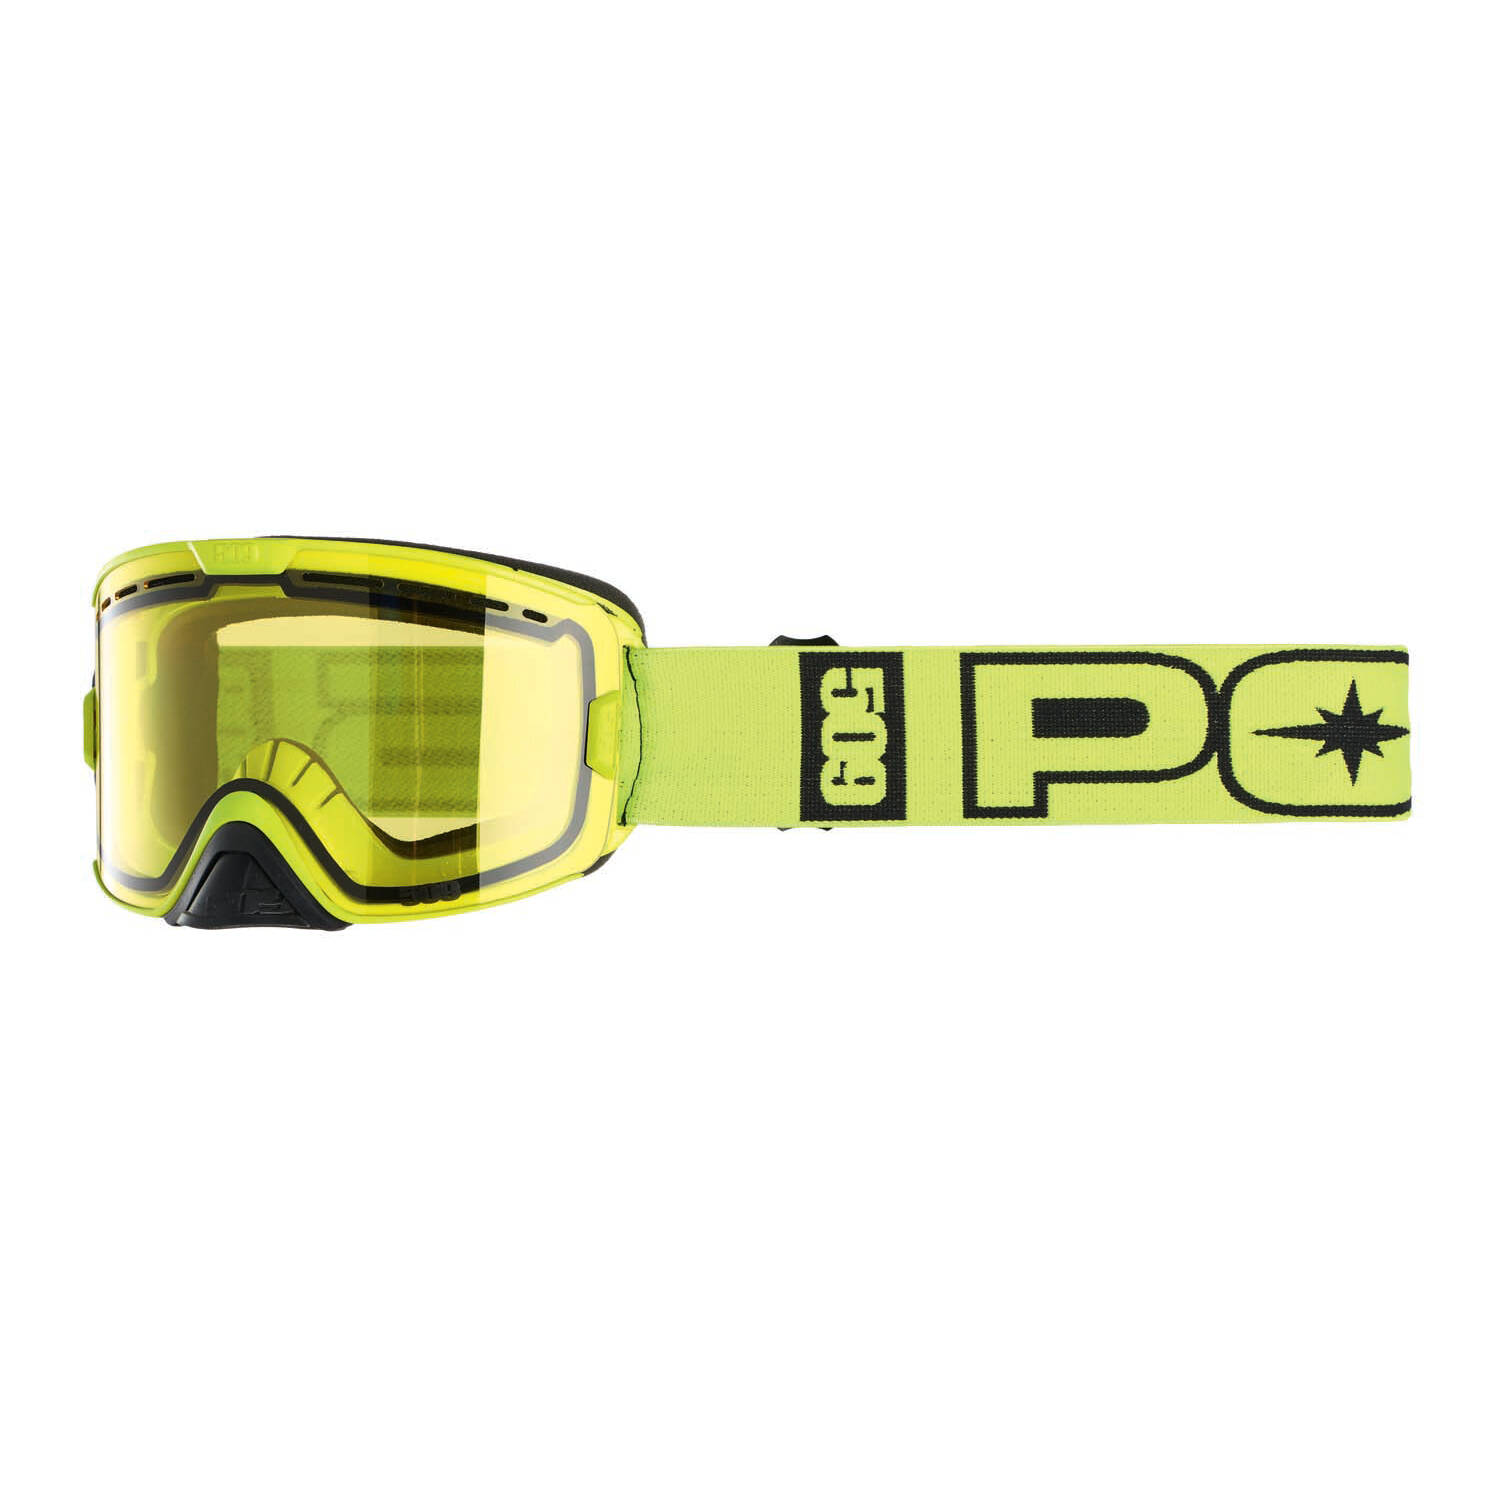 Polaris Snowmobile 509® Sinister X5 Adult Adjustable Snow Goggles with Outrigger Strap System 